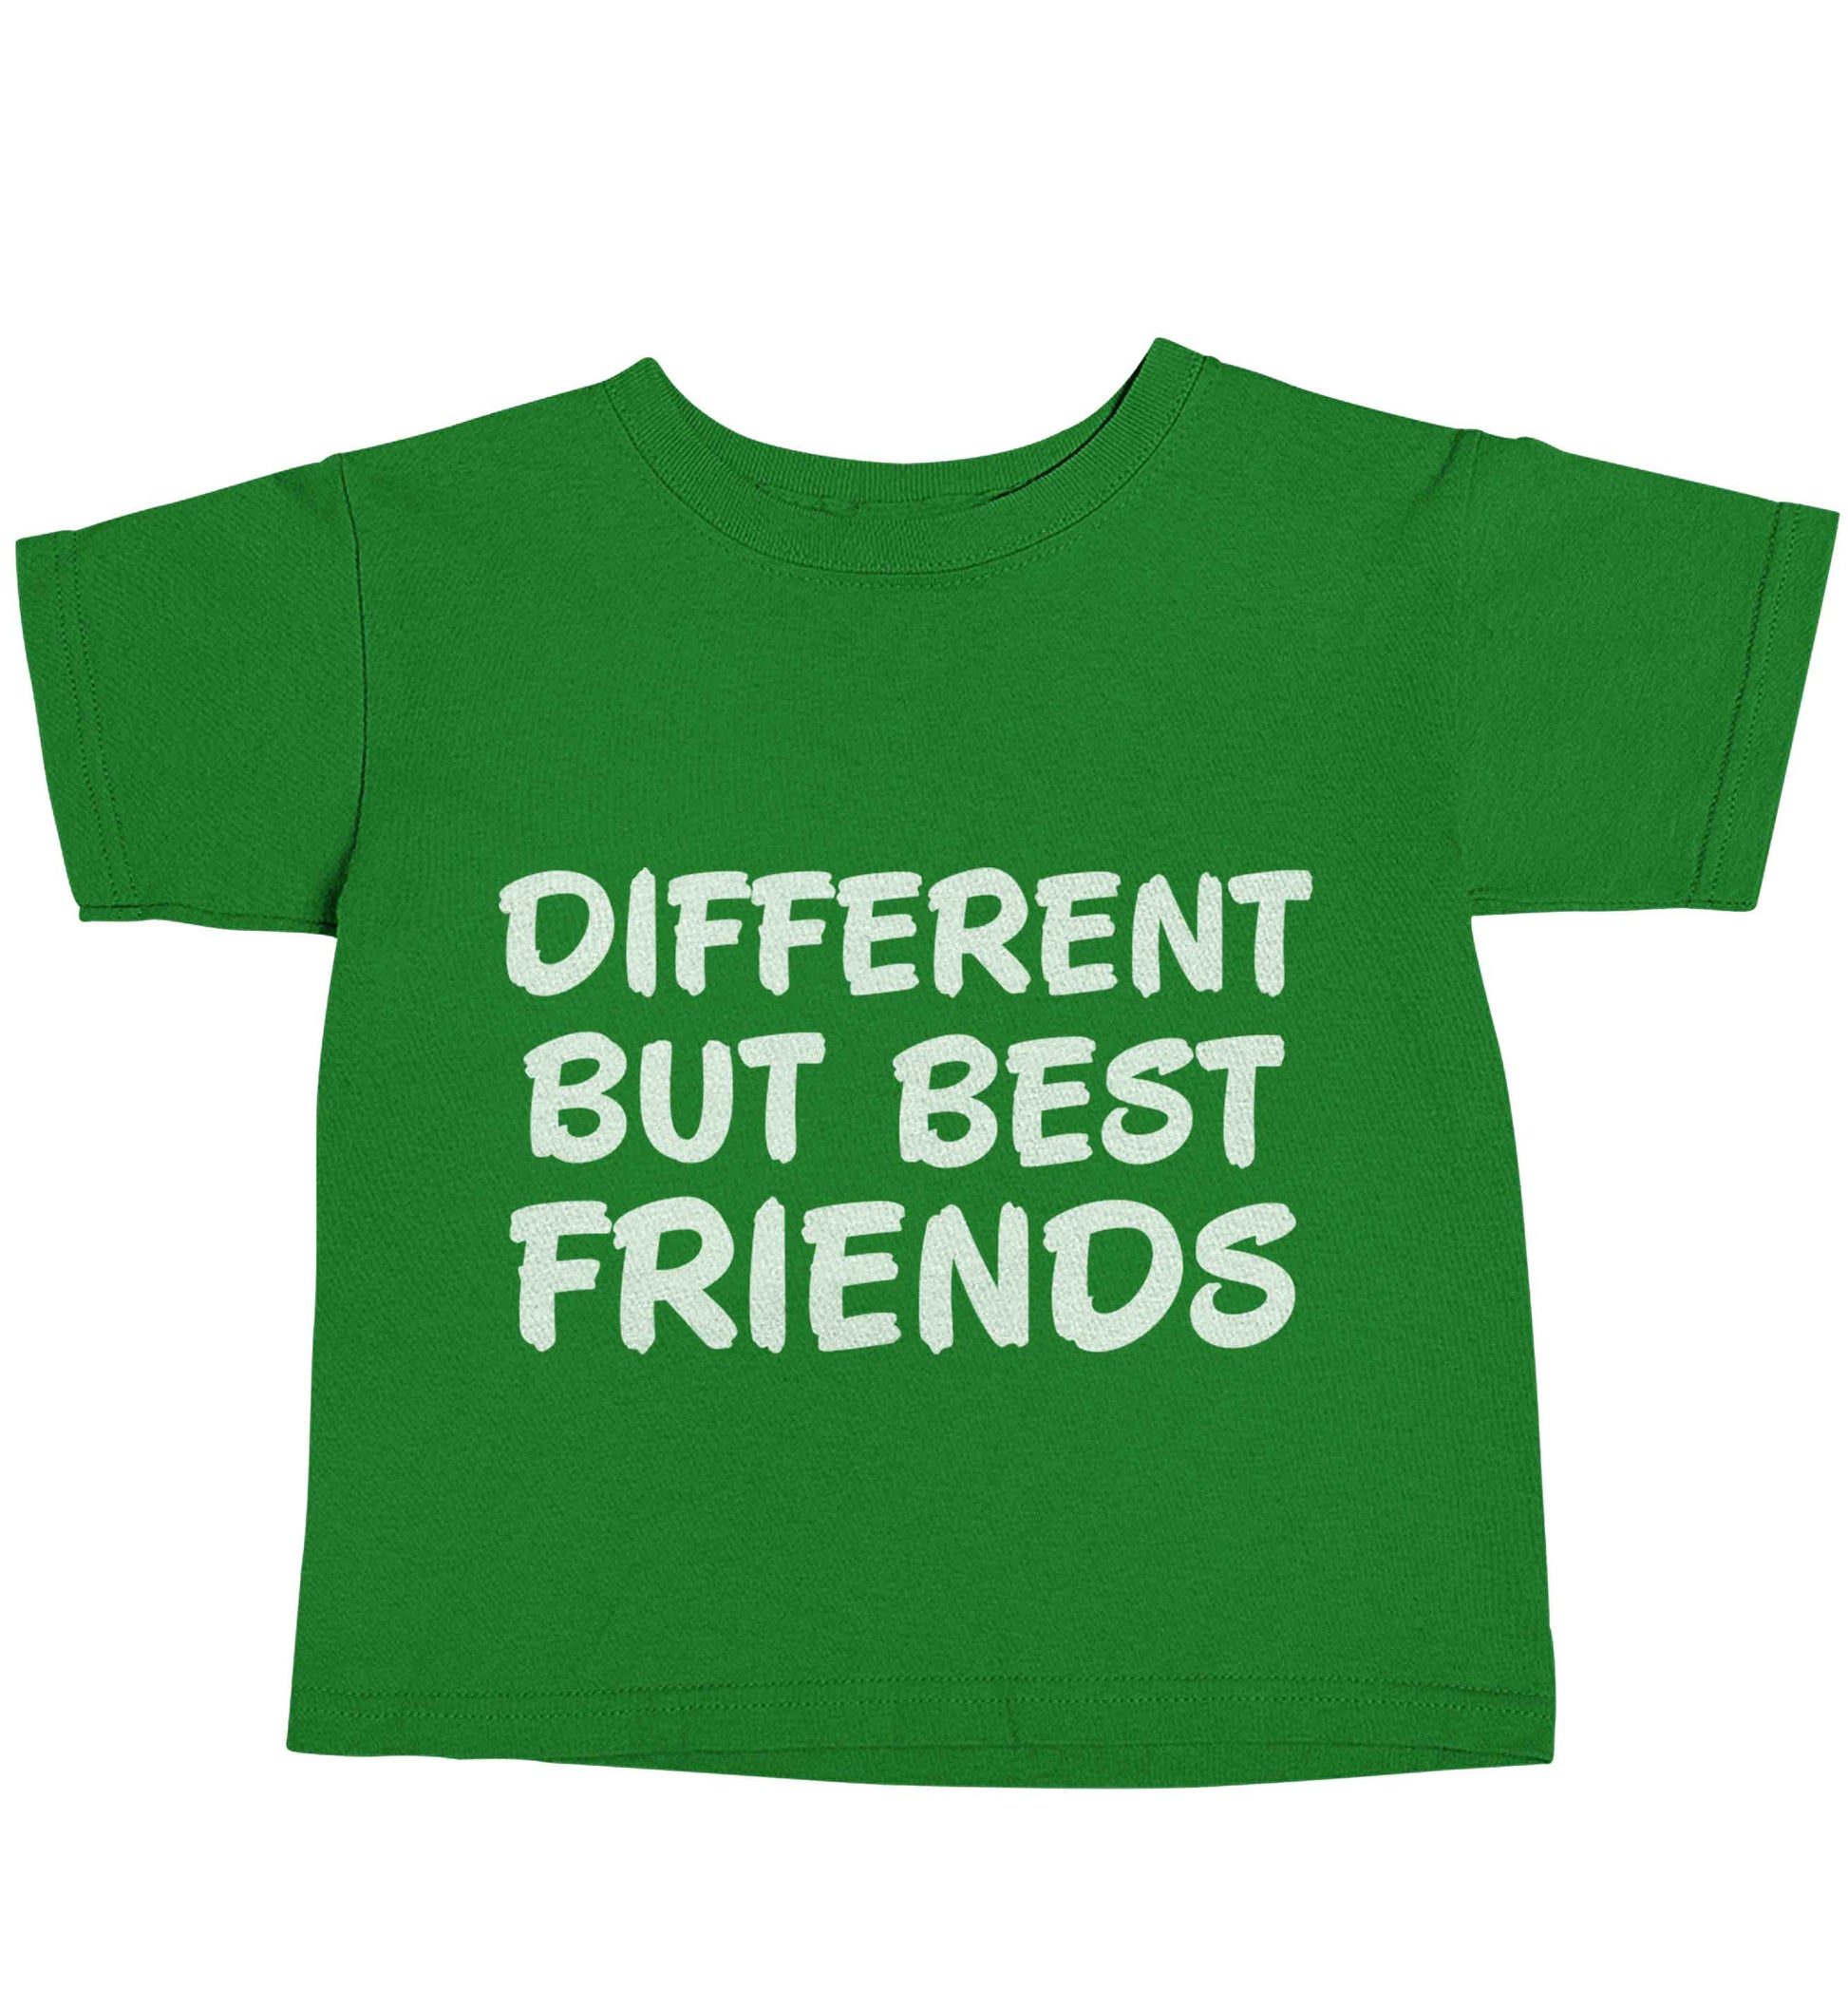 Different but best friends green baby toddler Tshirt 2 Years